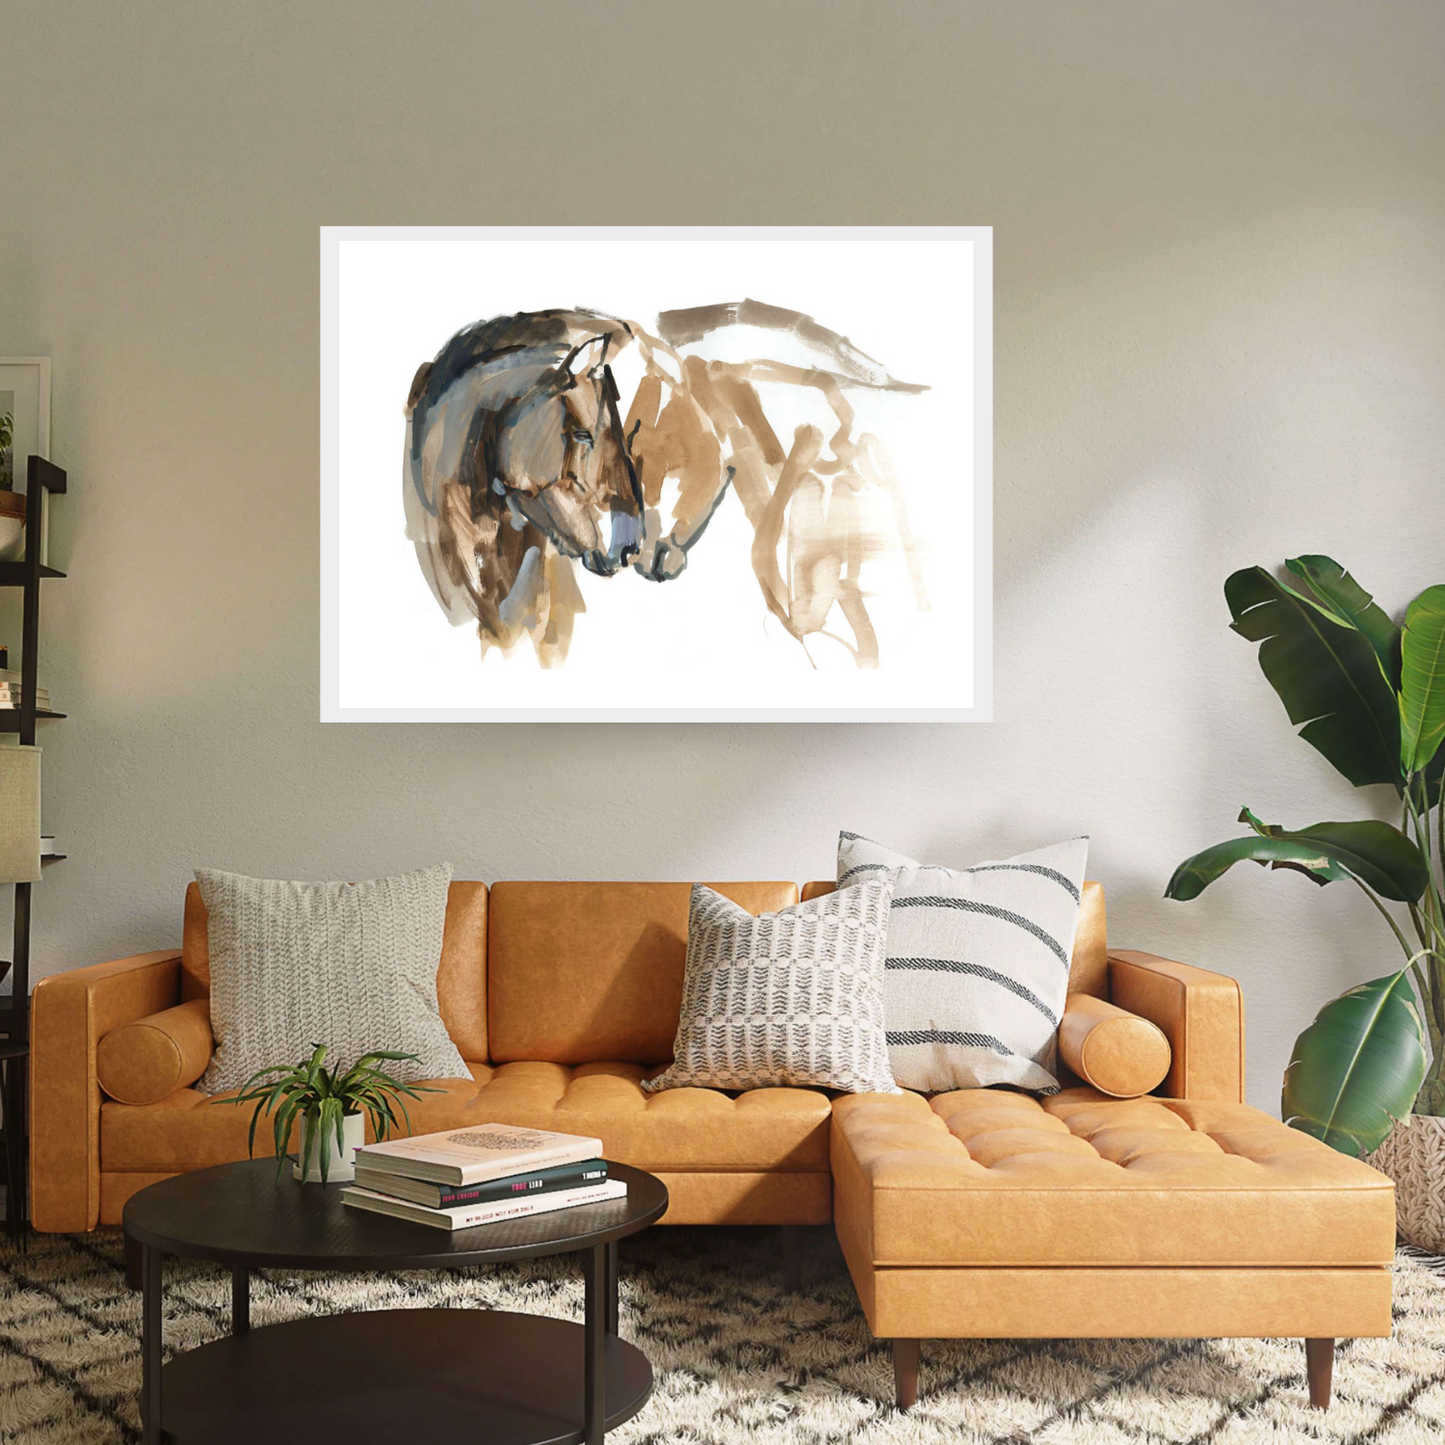 Experience the emotion in Mark Adlington's 'Nose to Nose.' From his Przewalski Horses series, this white framed artwork depicts a touching moment between majestic animals. Available as fine art prints, it's a captivating addition to any collection.